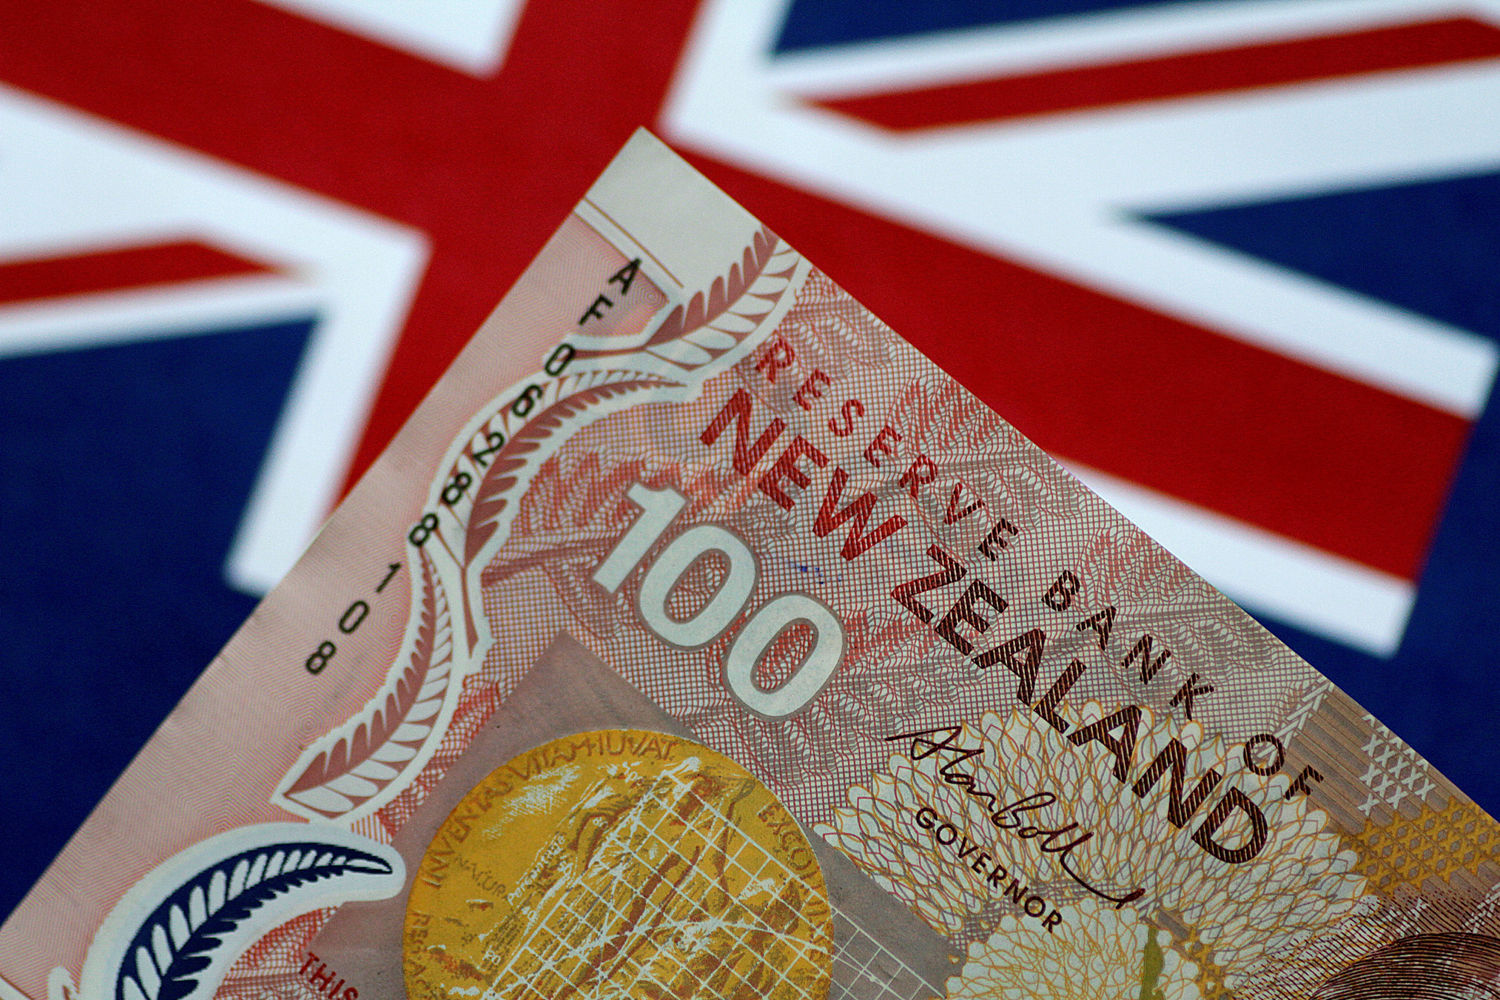 New Zealand GDP shrinks more than expected in 4th quarter